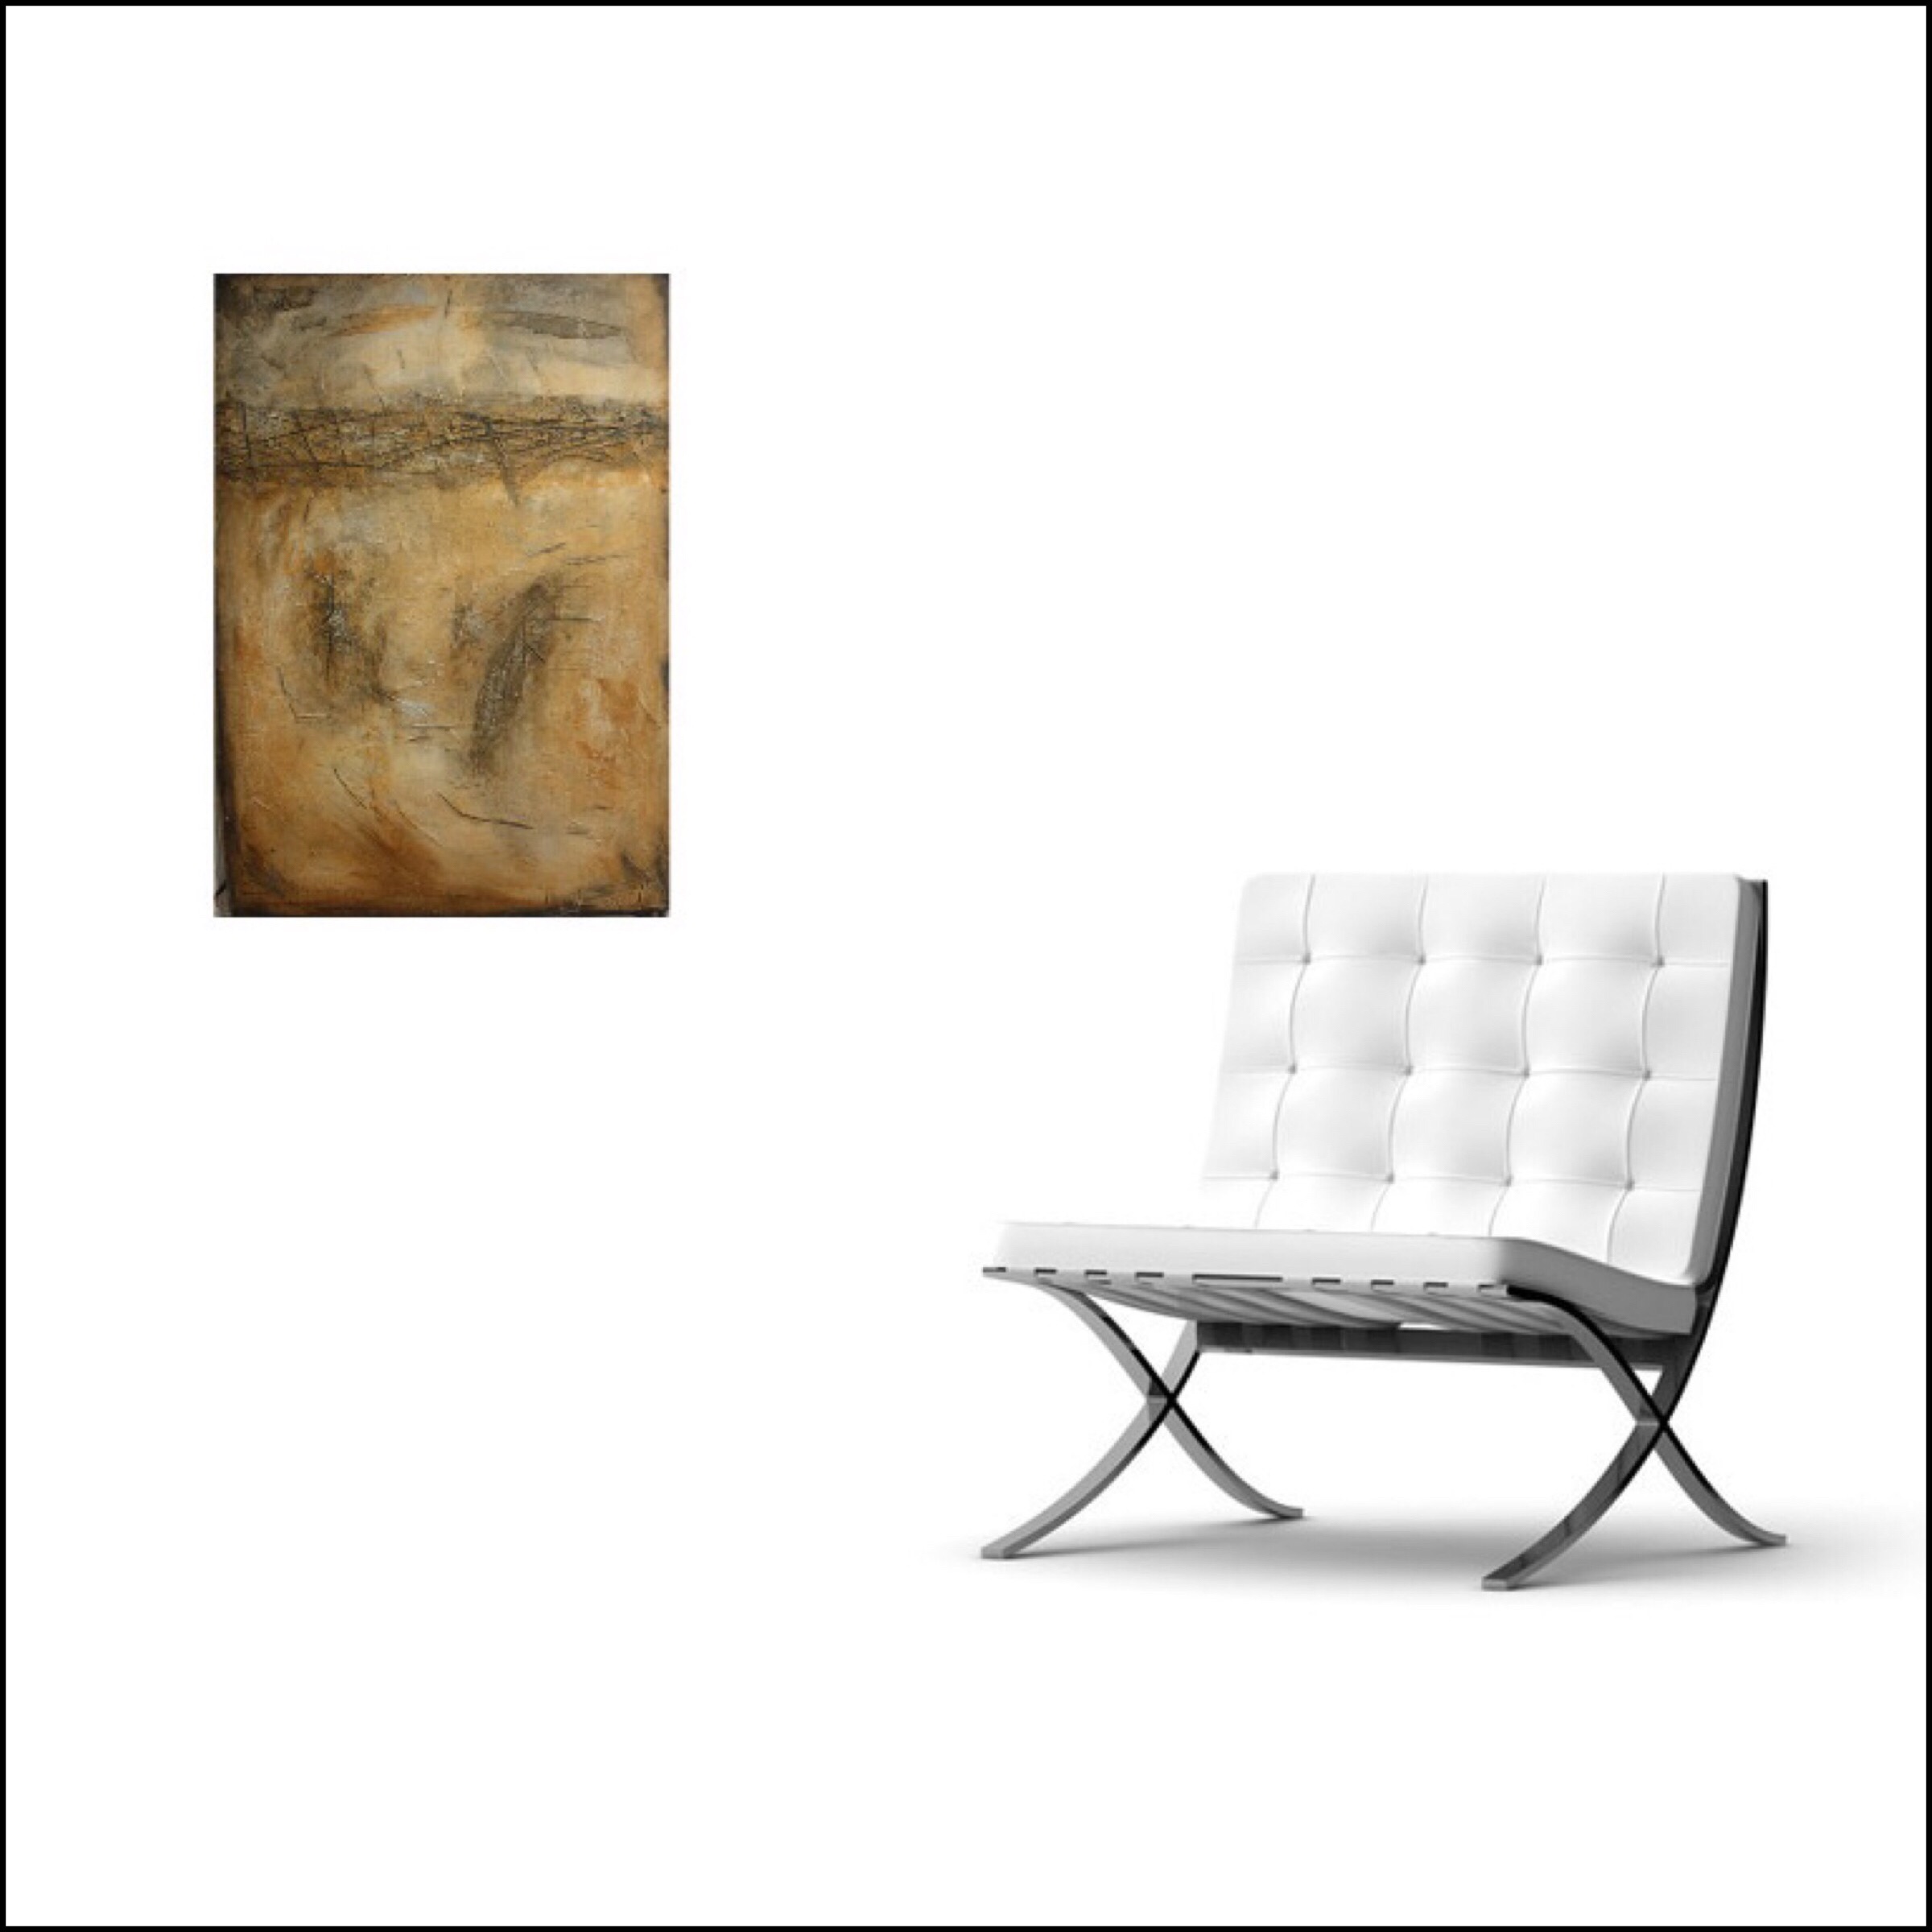 Interior design: Textured abstract painting in earth colors